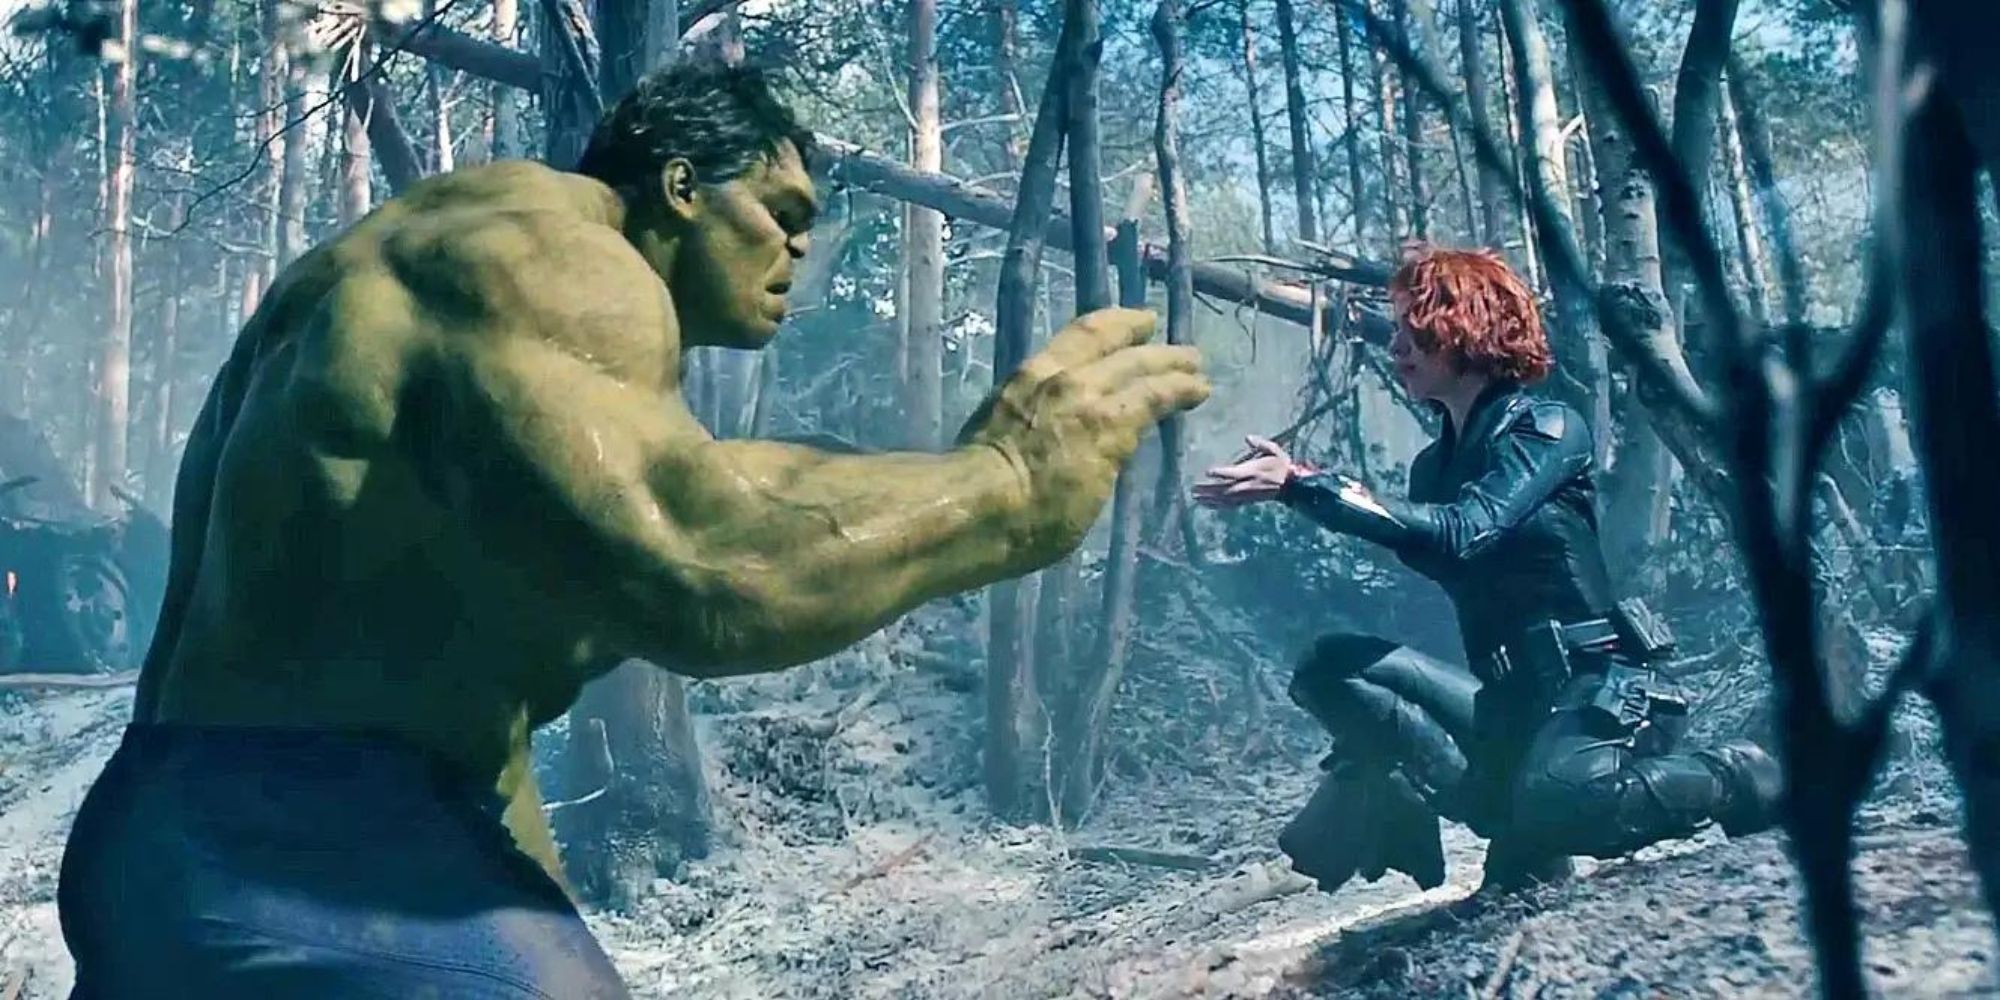 Hulk and Black Widow in Avengers Age of Ultron